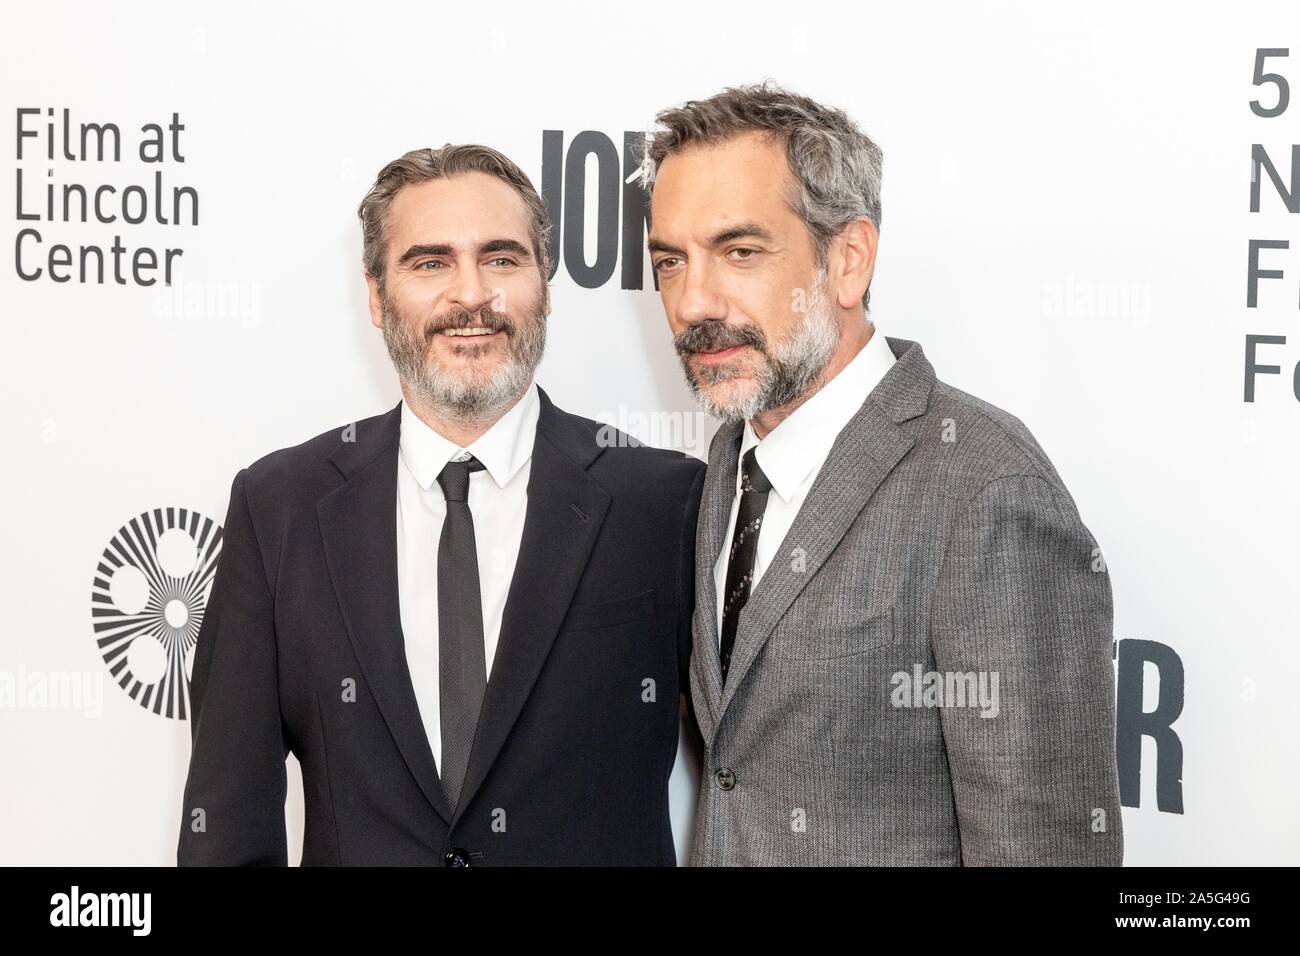 NEW YORK, NY - OCTOBER 02: Joaquin Phoenix and Todd Phillips attend a screening of 'Joker' during the 57th annual New York Film Festival at Alice Tull Stock Photo